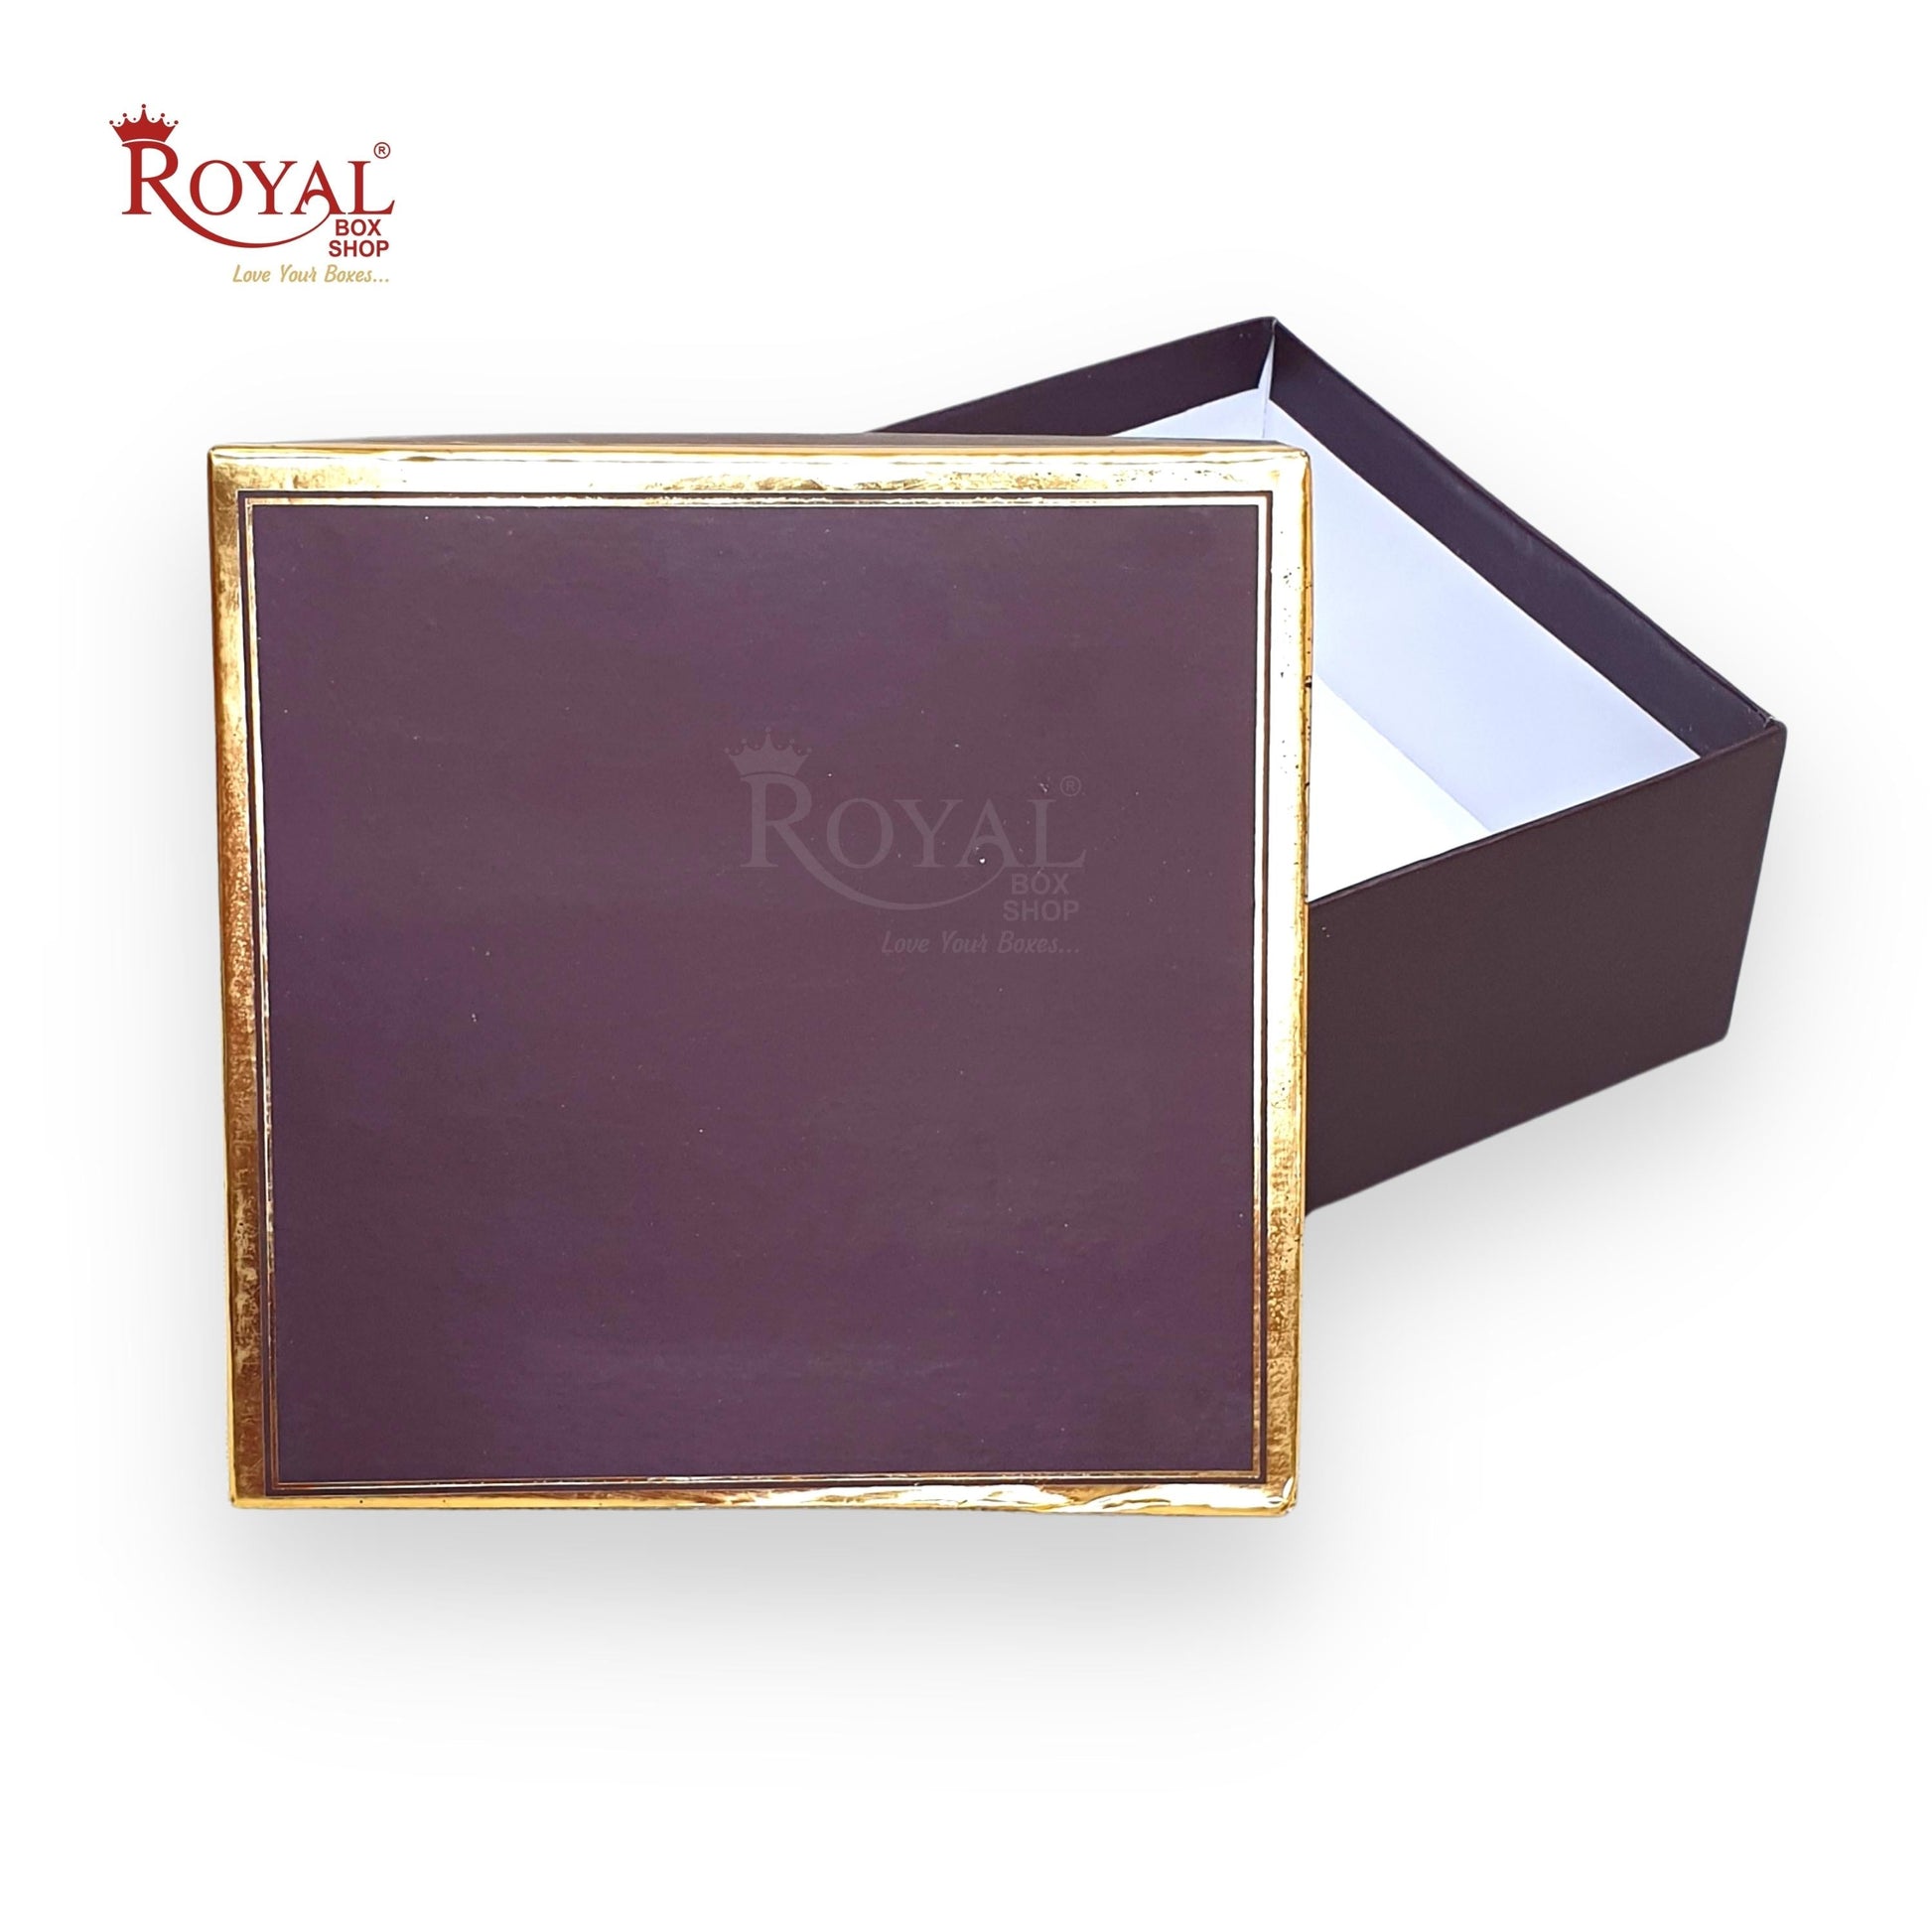 Hamper Gift Boxes I 8x8x4 Inches I Wine Color with Gold Foiling I For Return Wedding Corporate Hamper Gifts Box Royal Box Shop